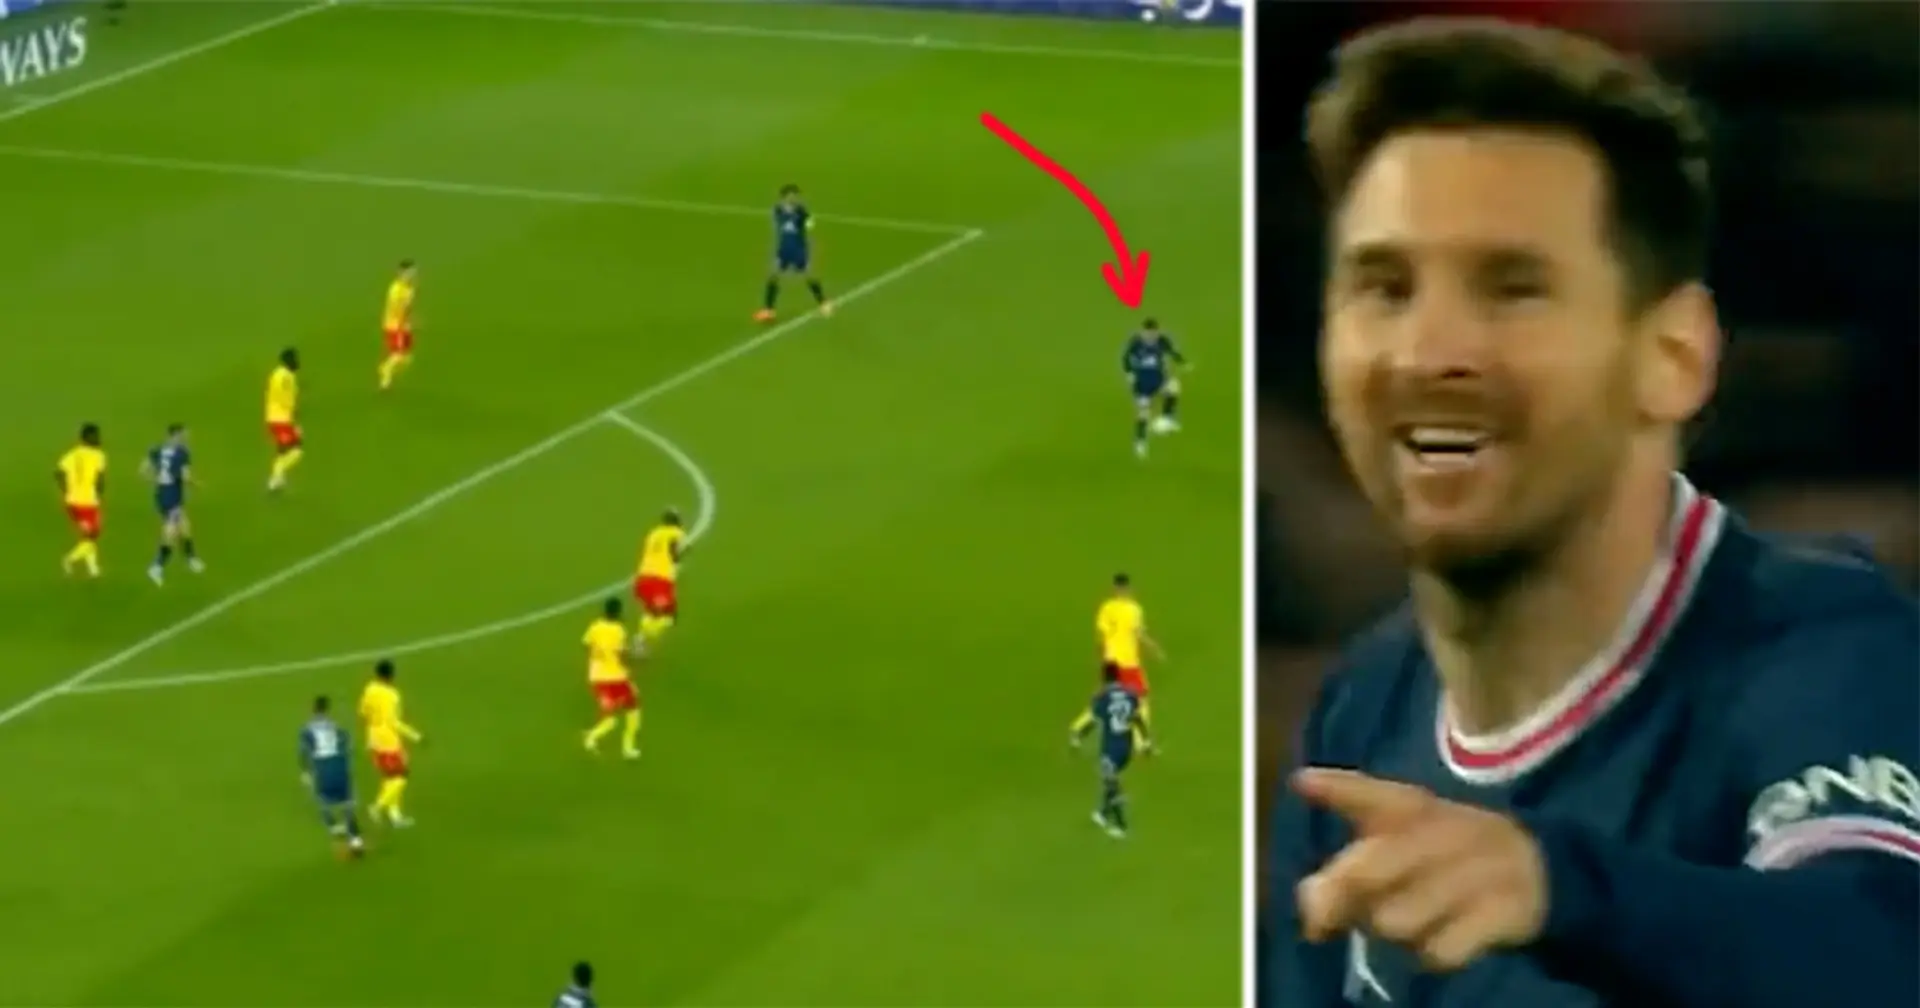 Messi scores screamer that officially secures Ligue 1 title for PSG